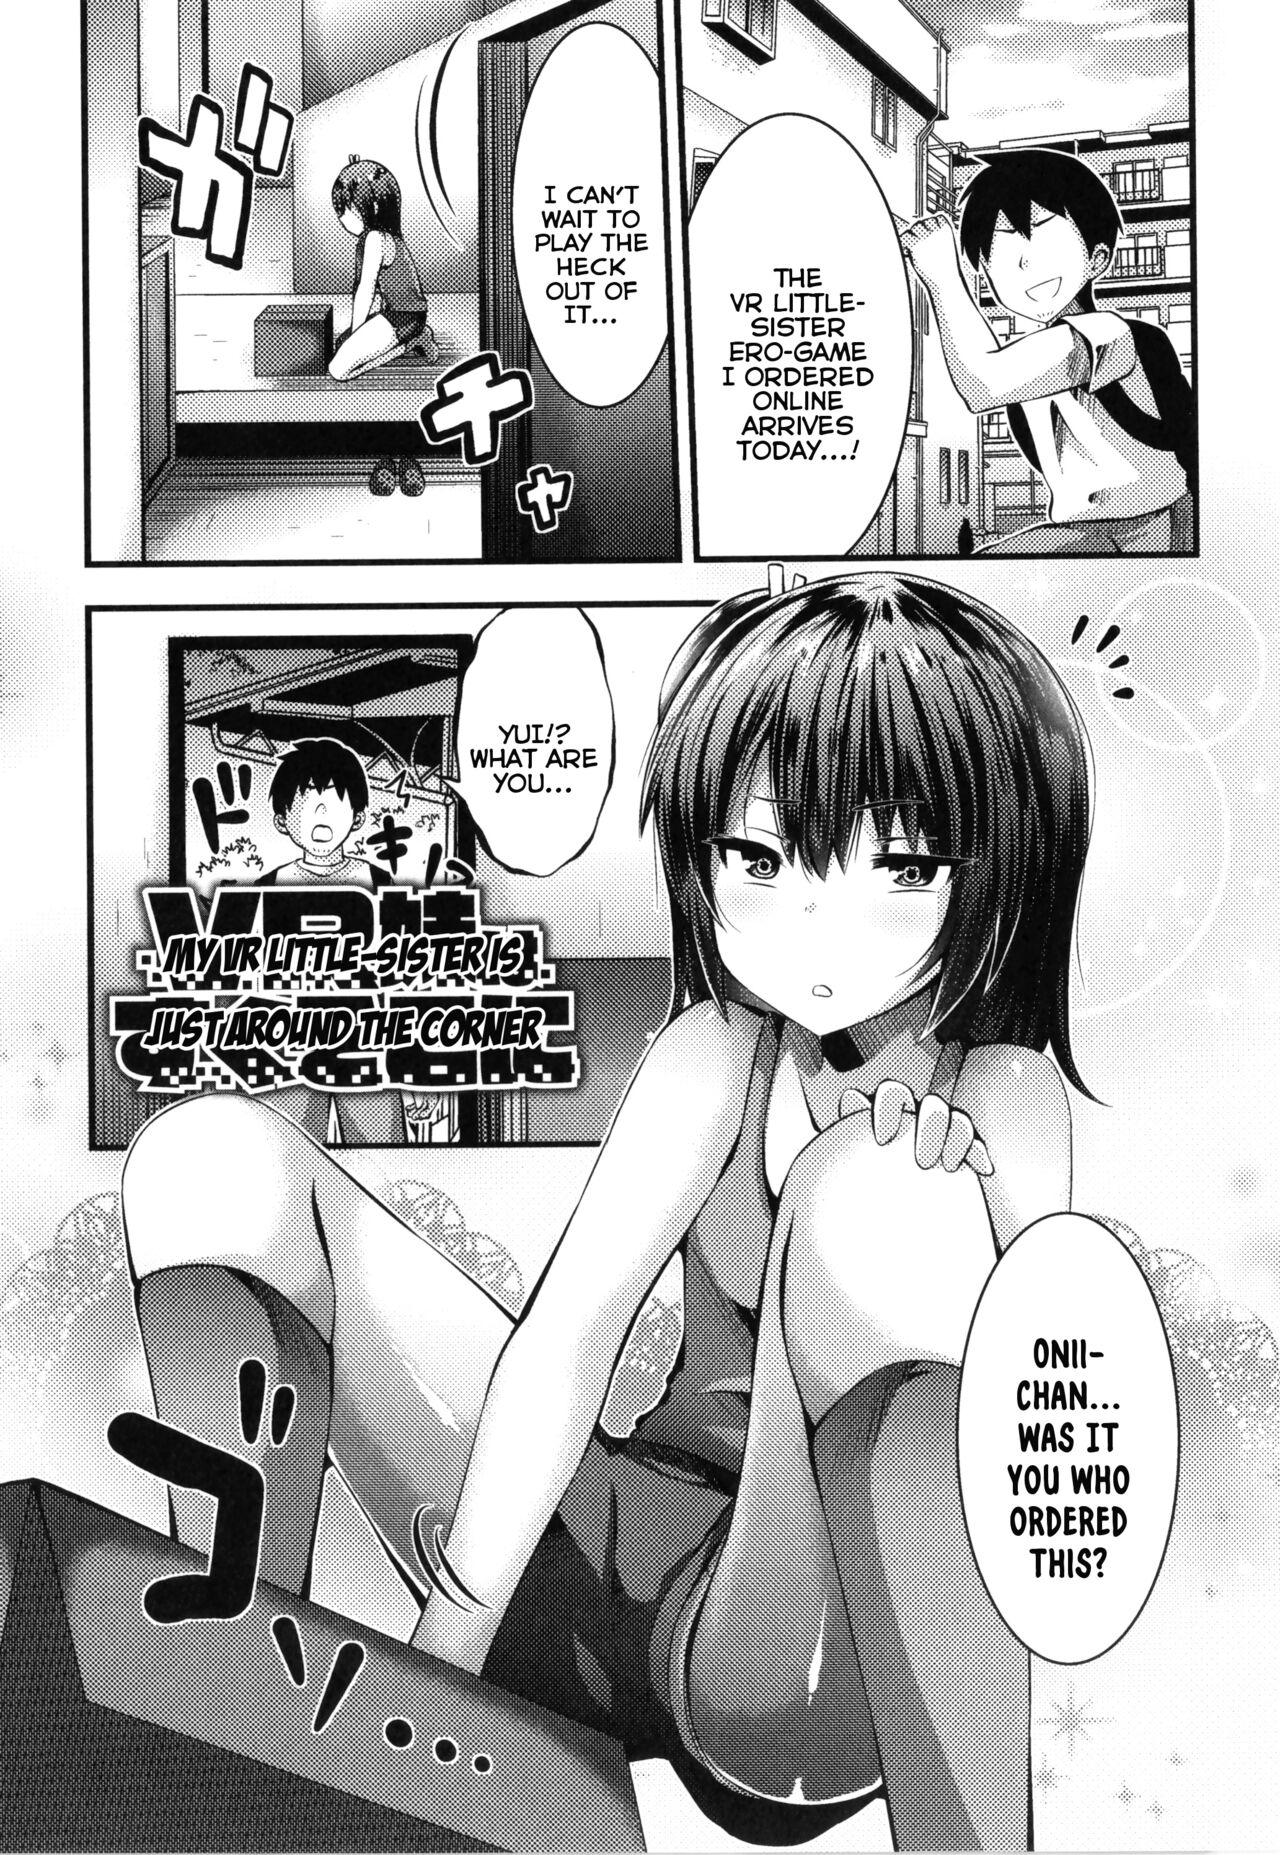 Cbt VR Imouto wa Sugu Soko ni | My VR Little-Sister is Just Around the Corner Teasing - Page 1